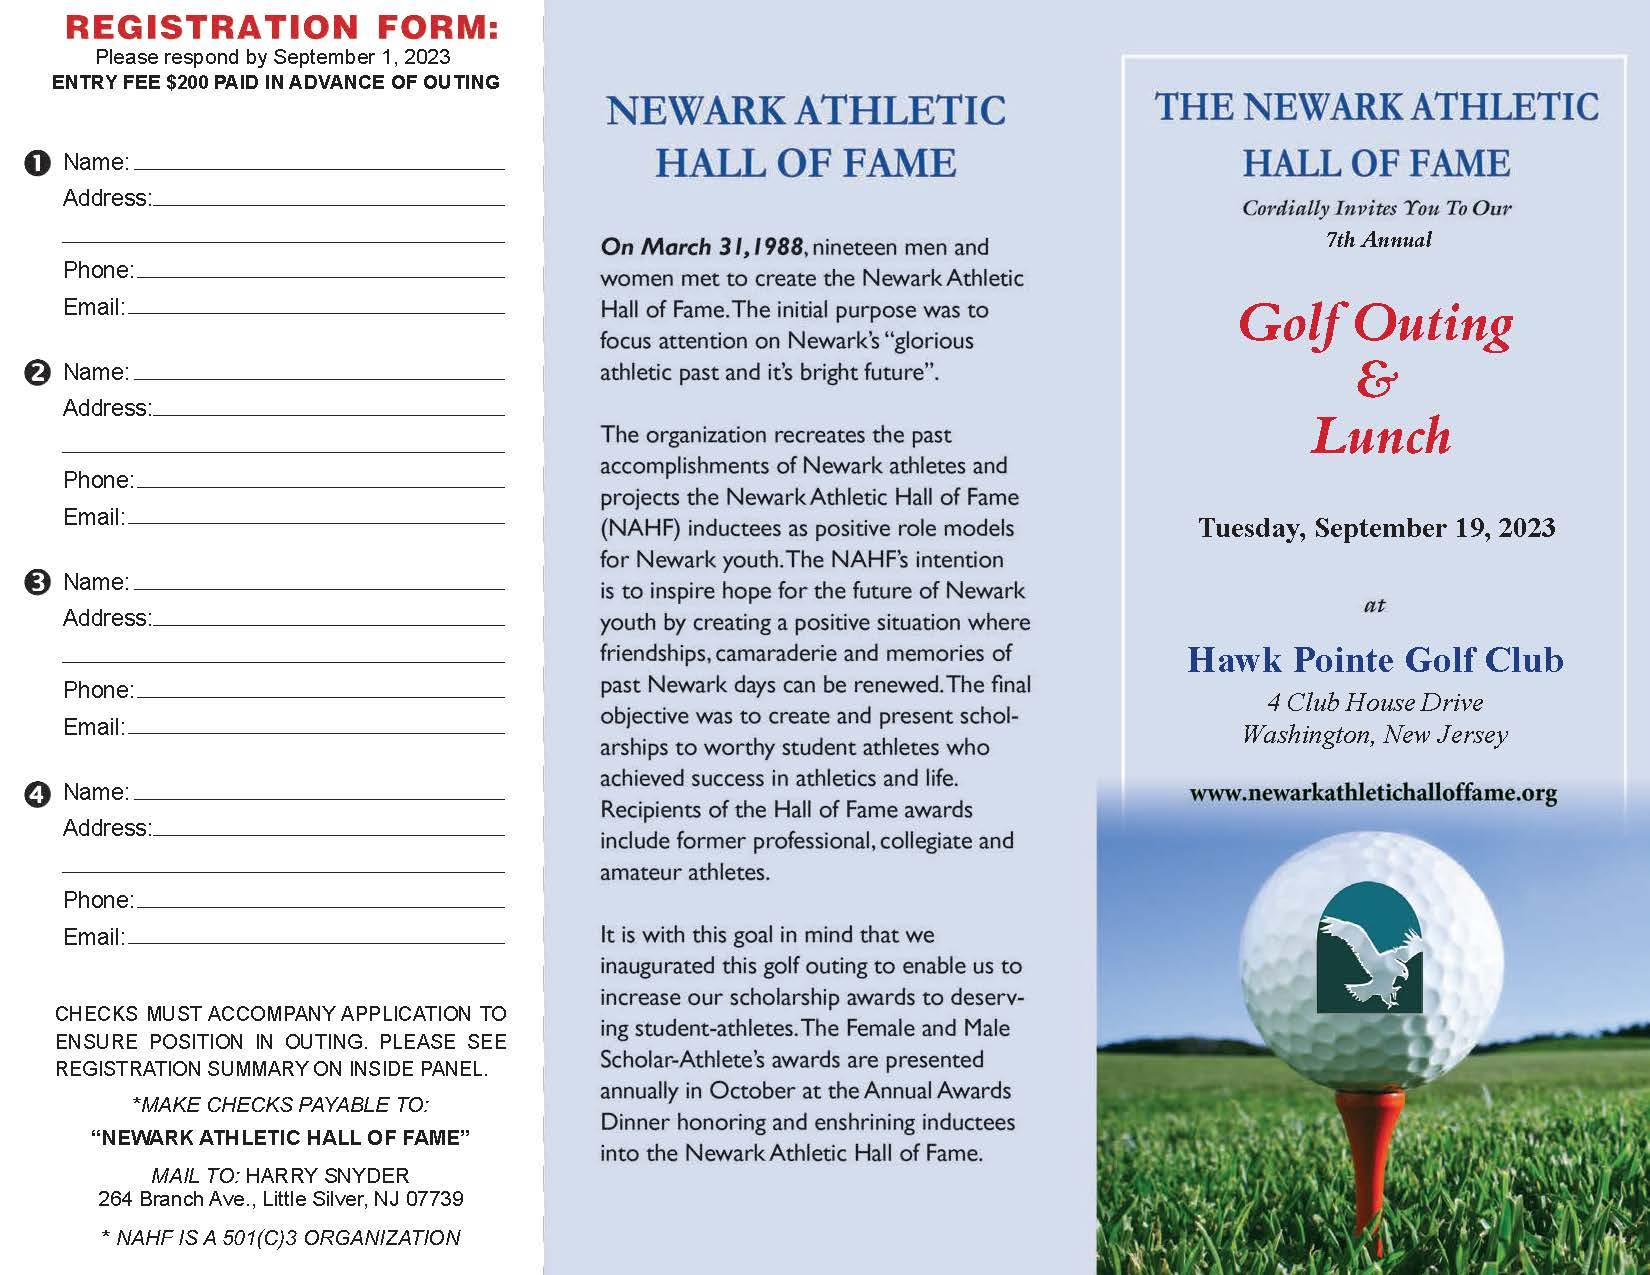 Newark Athletic Hall of Fame 7th Annual Golf Outing